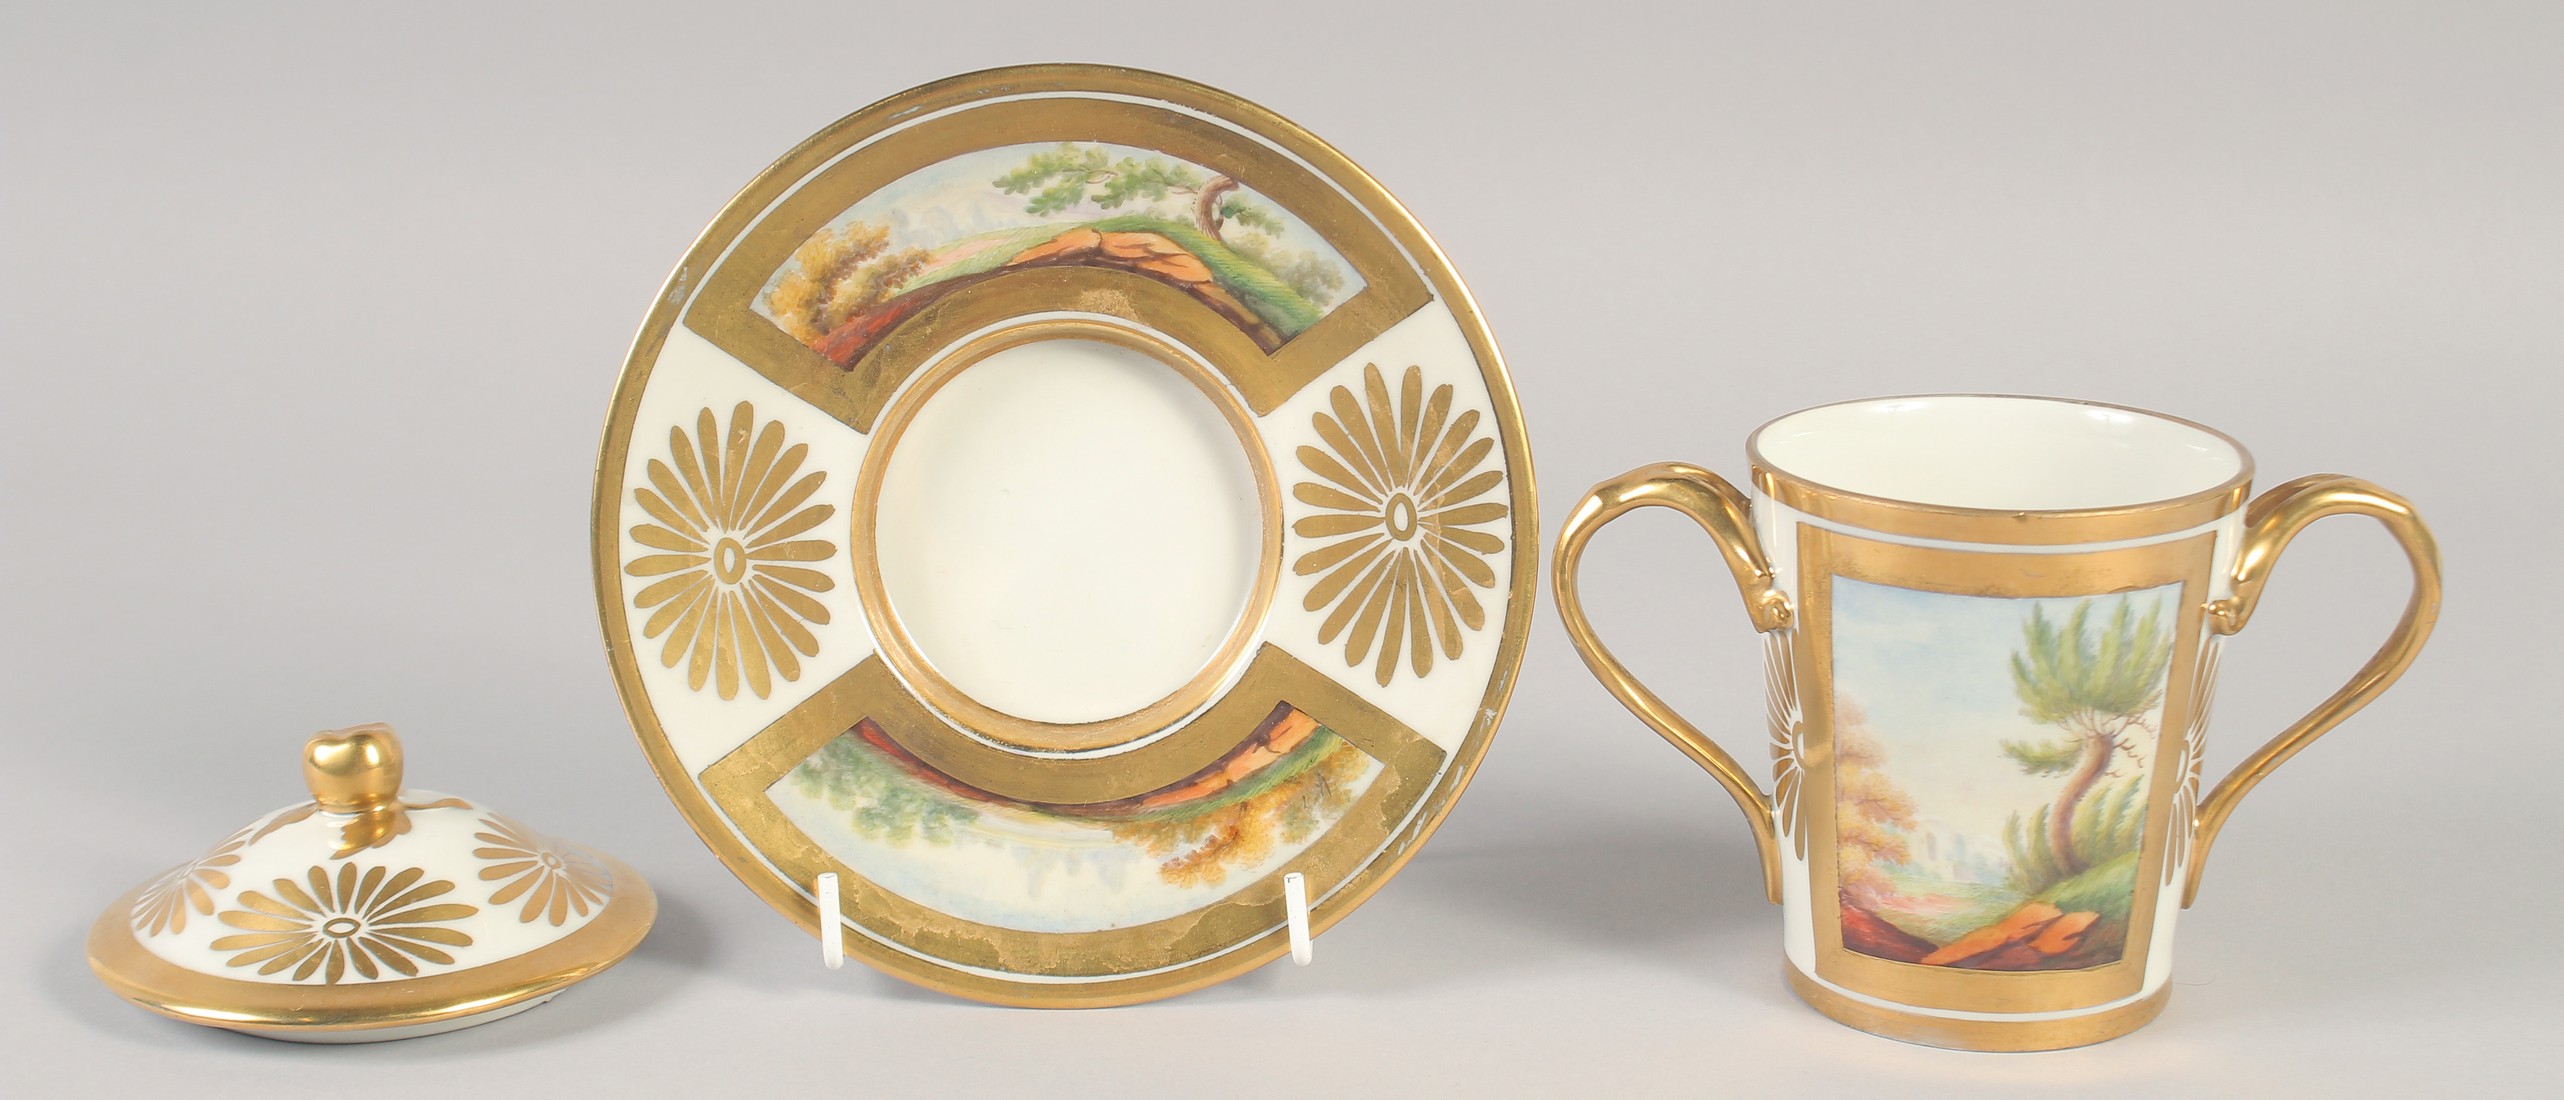 A 19TH CENTURY PARIS PORCELAIN COVERED CHOCOLATE CUP AND STAND, the saucer and cup each with two - Image 3 of 8